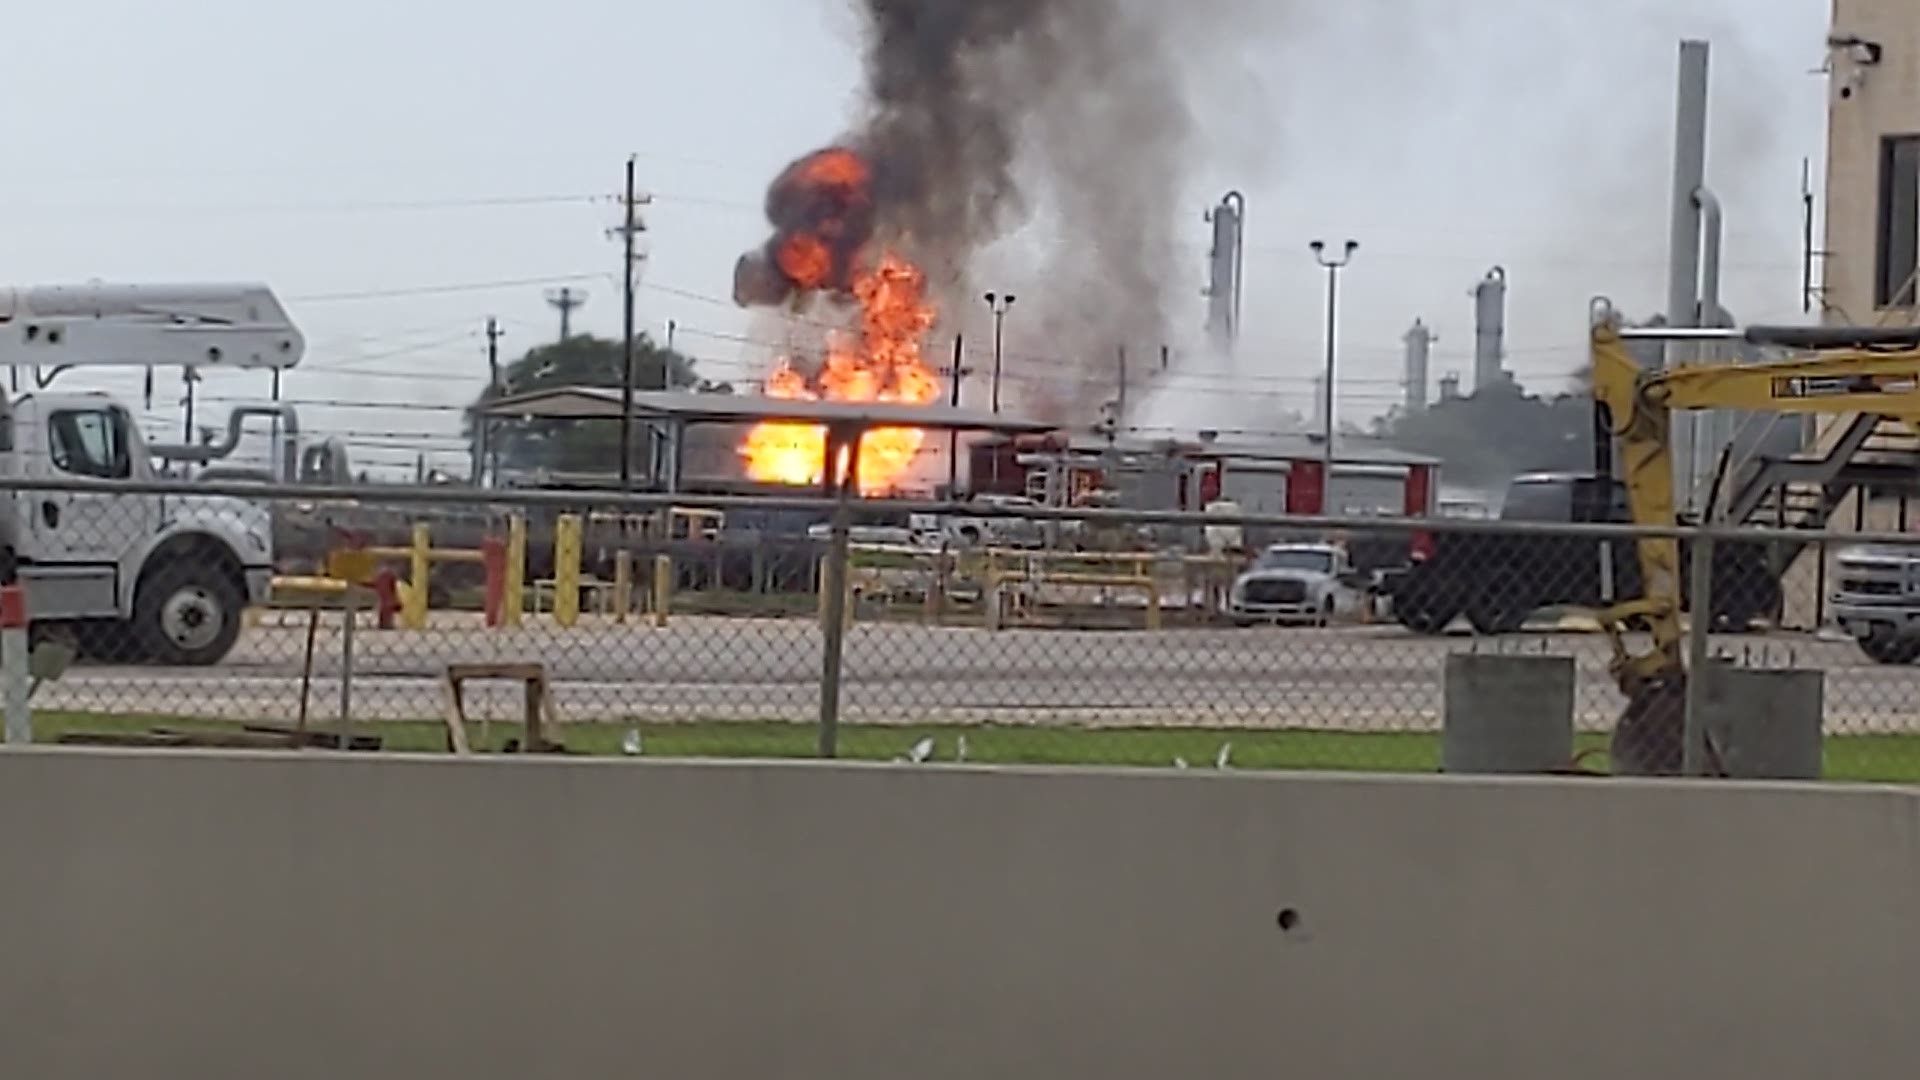 The explosion was reported at about 4:45 p.m. at a natural gas plant on West Winfree Street, according to authorities.